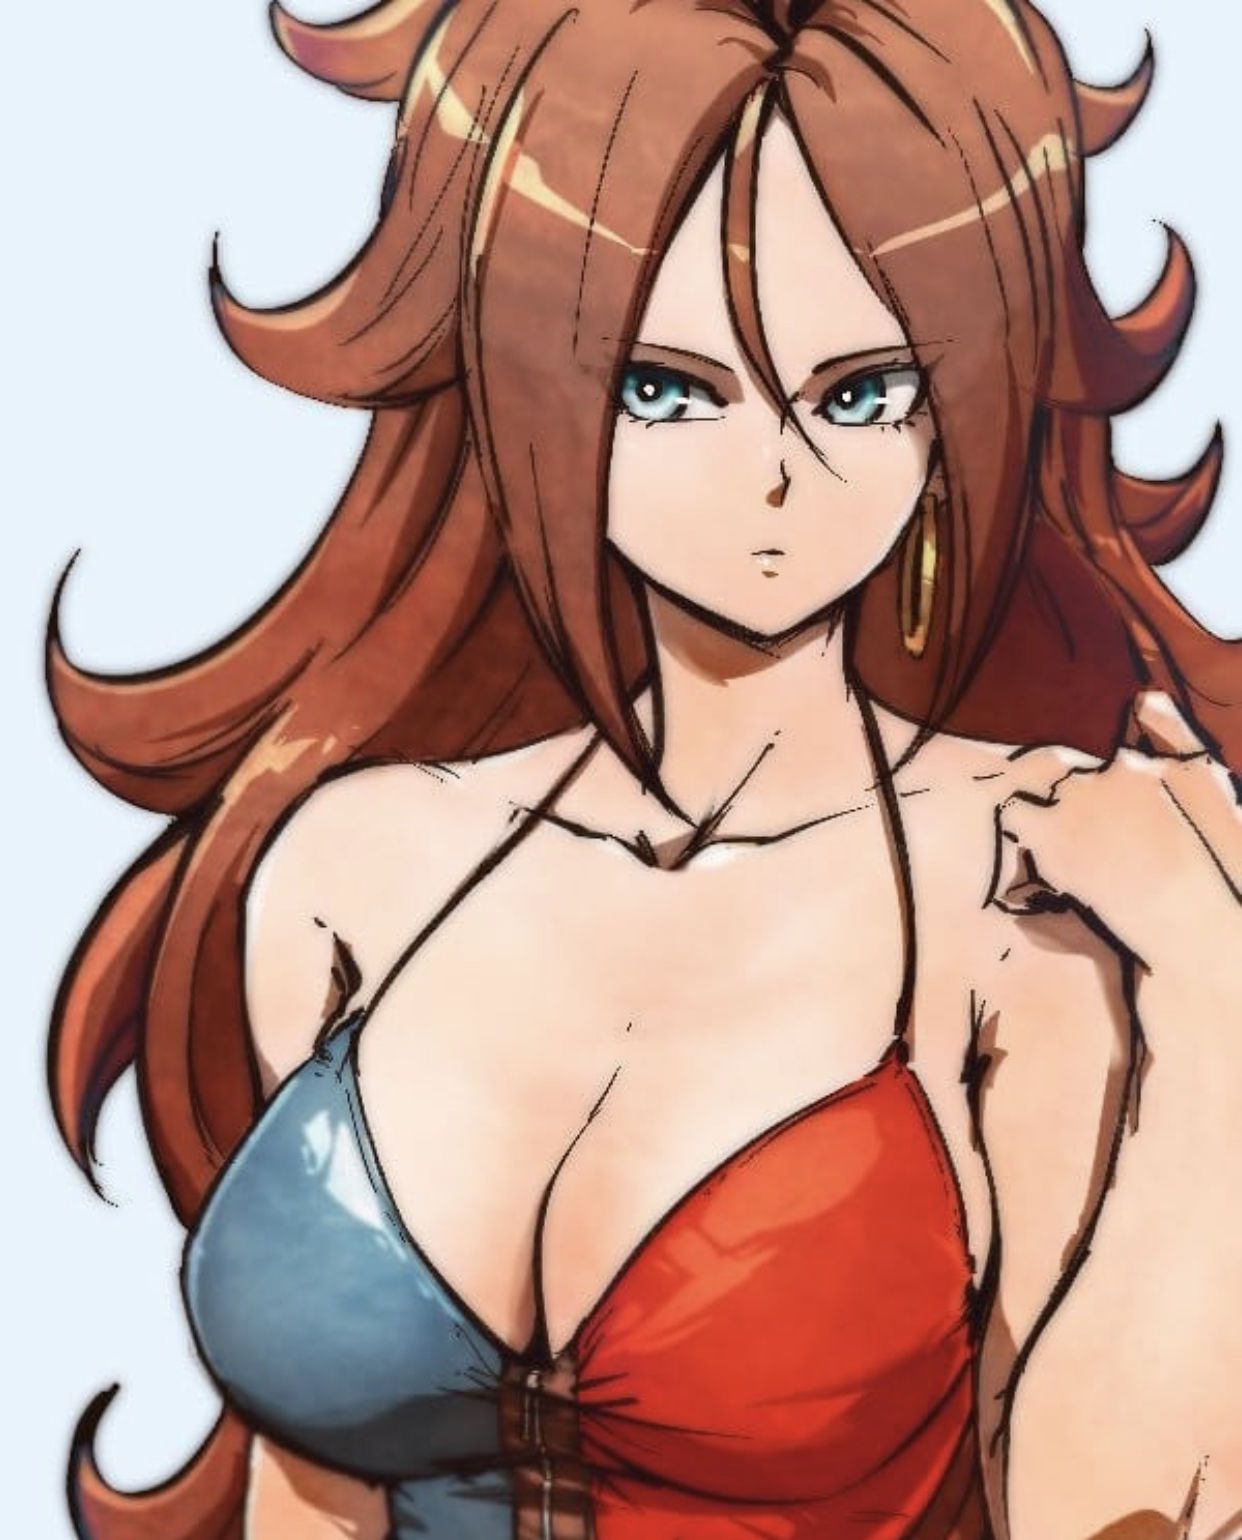 My Favorite Android 21 Pics 44